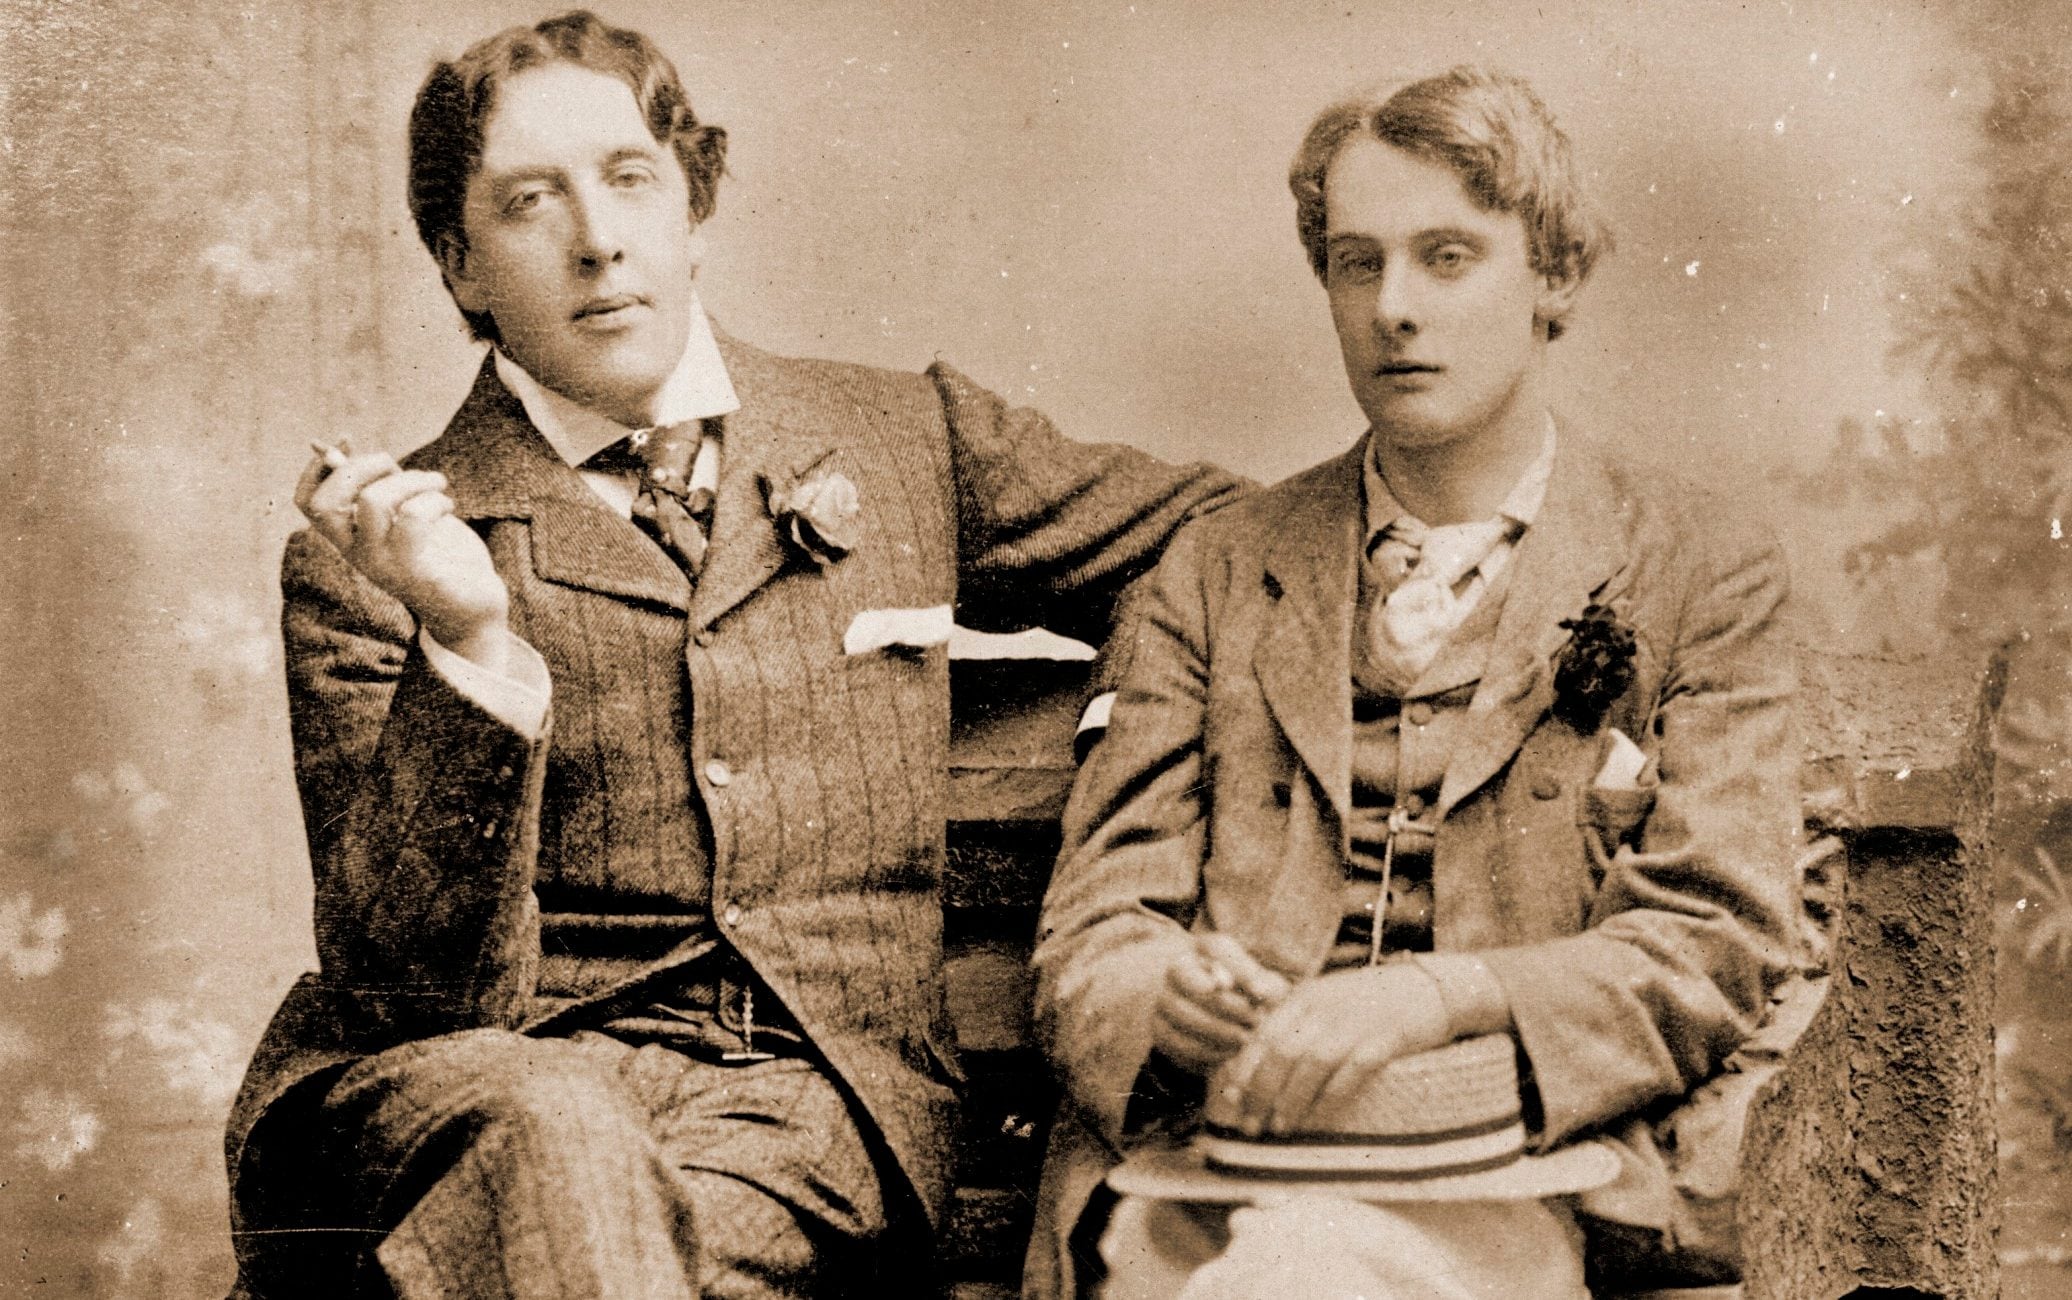 Oscar Wilde and Lord Alfred Douglas sitting next to each other